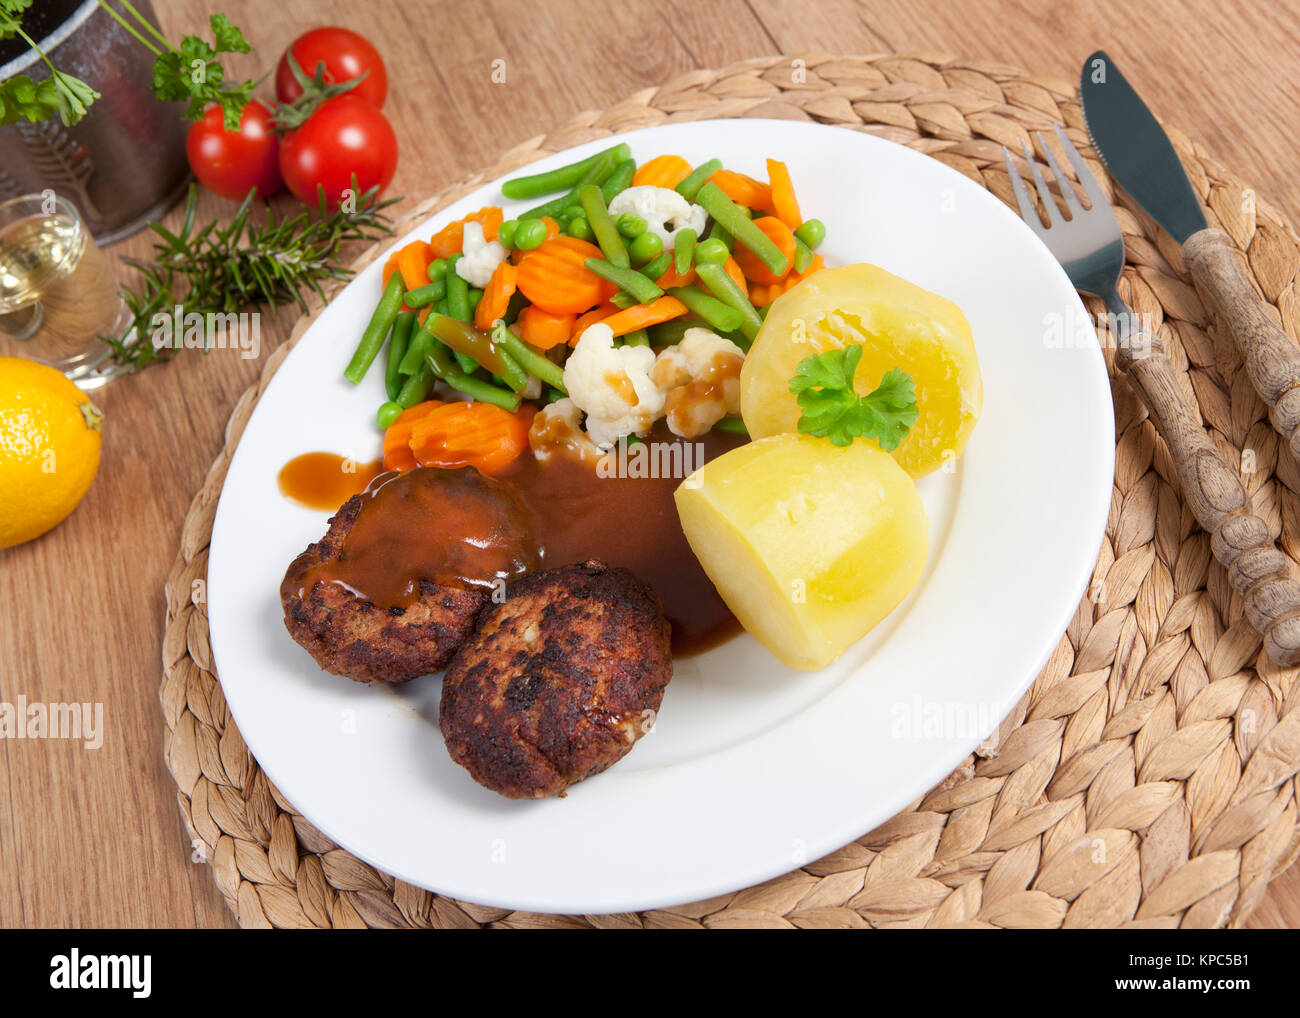 meatballs with vegetables Stock Photo